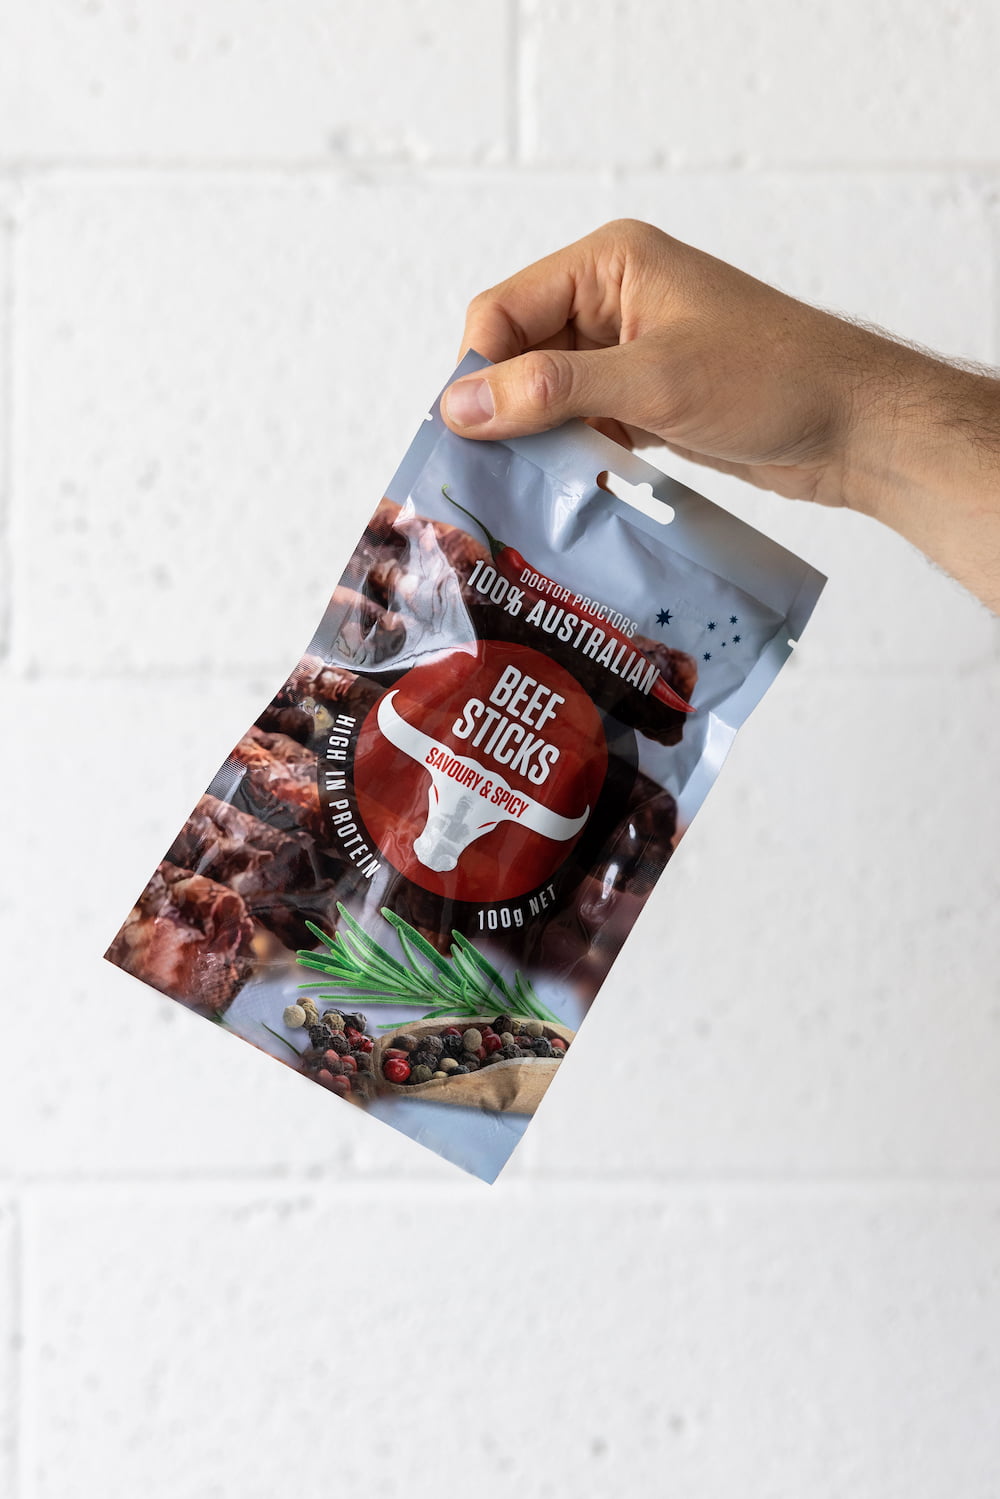 Hand holding a pouch of beef sticks up in the air in front of a white brick wall